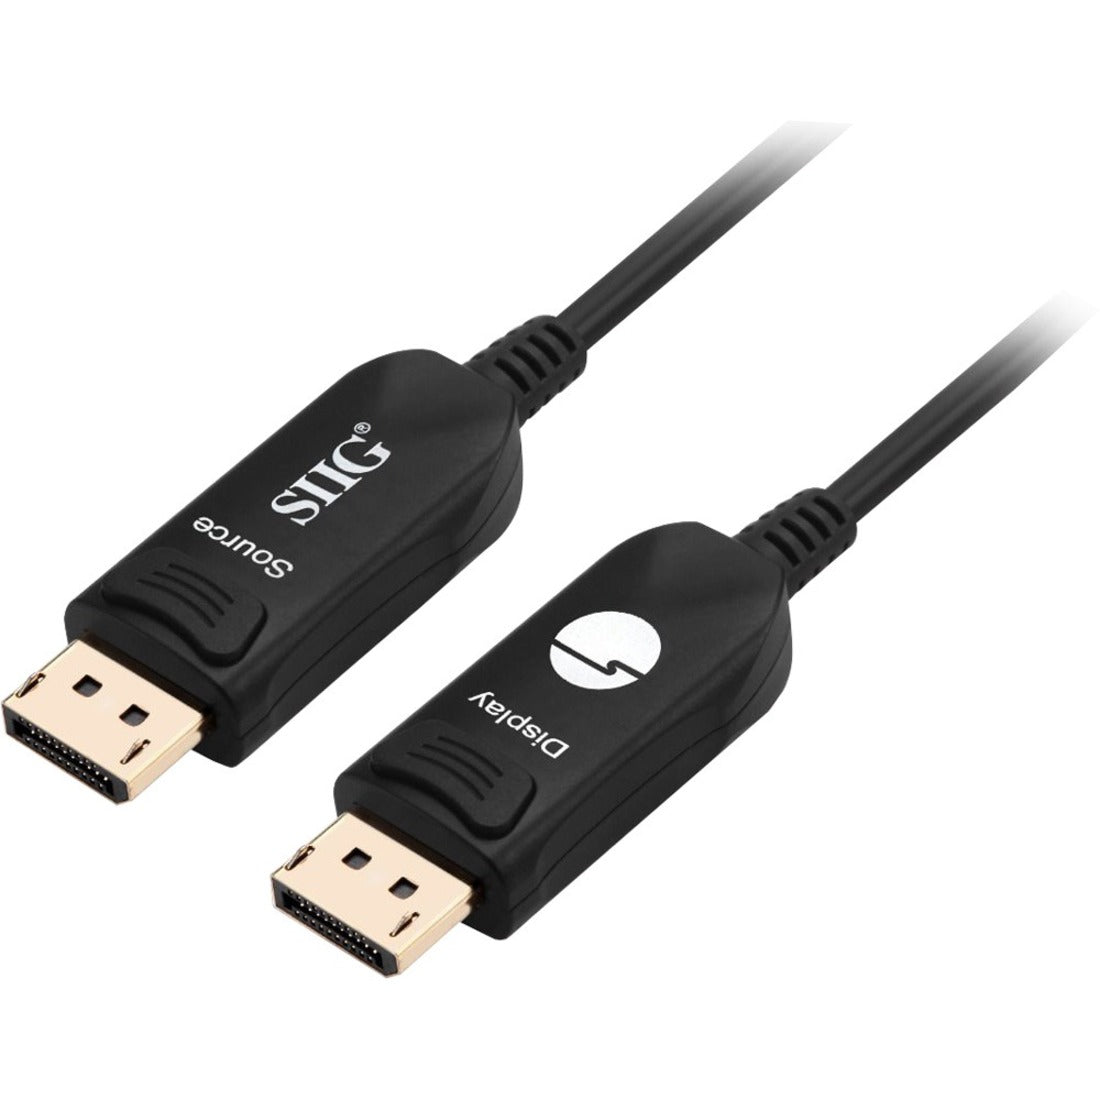 SIIG CB-DP2211-S1 4K DisplayPort 1.2 AOC Cable - 15M, Plug & Play, 21.6 Gbit/s Data Transfer Rate, Gold Plated Connectors